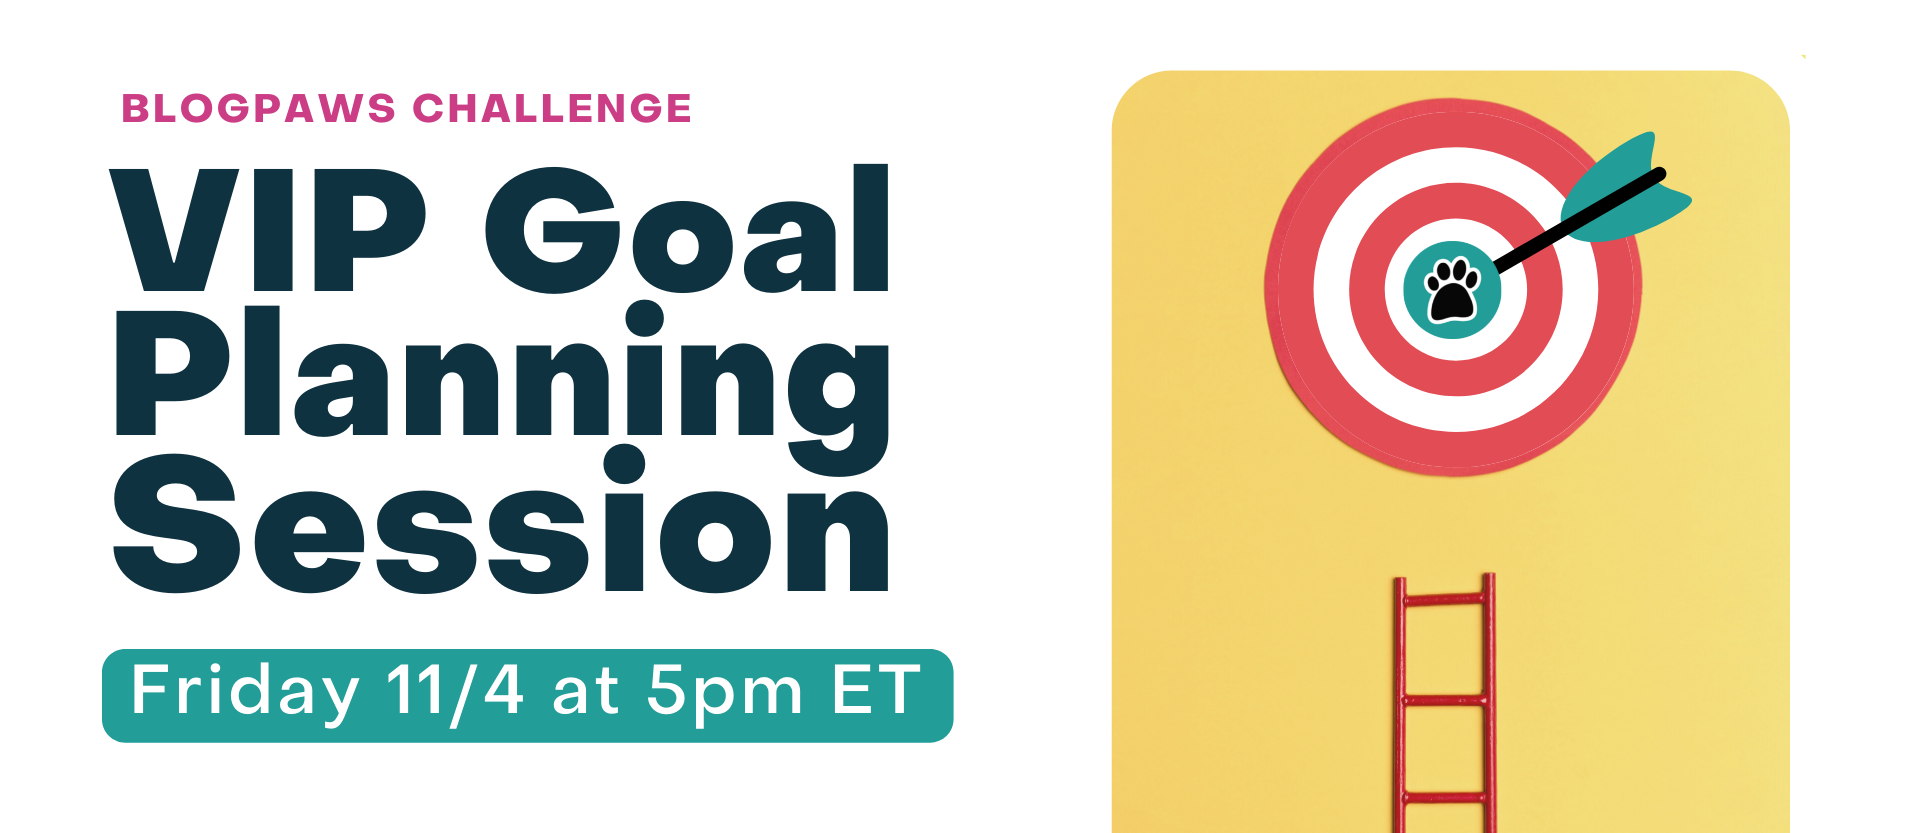 Text: BlogPaws Challenge VIP Goal Planning Session Friday 11/4 at 5pm ET with a yellow box and target inside with the ladder under the target